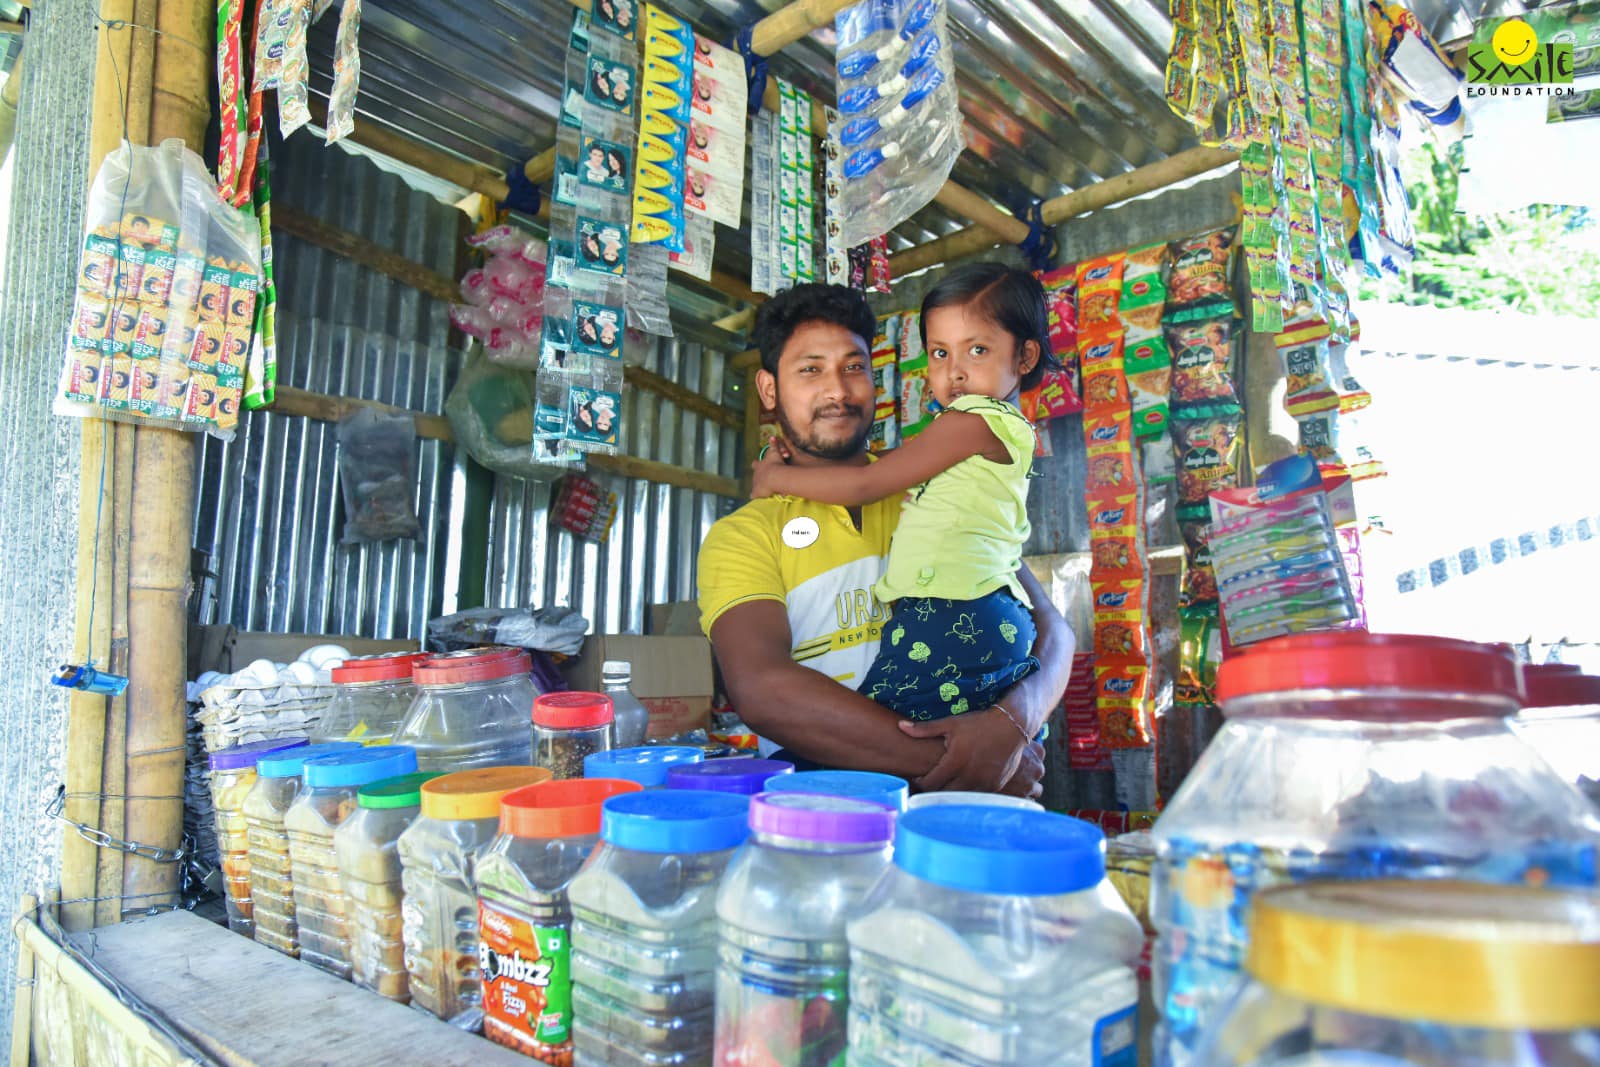 A shopkeeper with his girl child in India